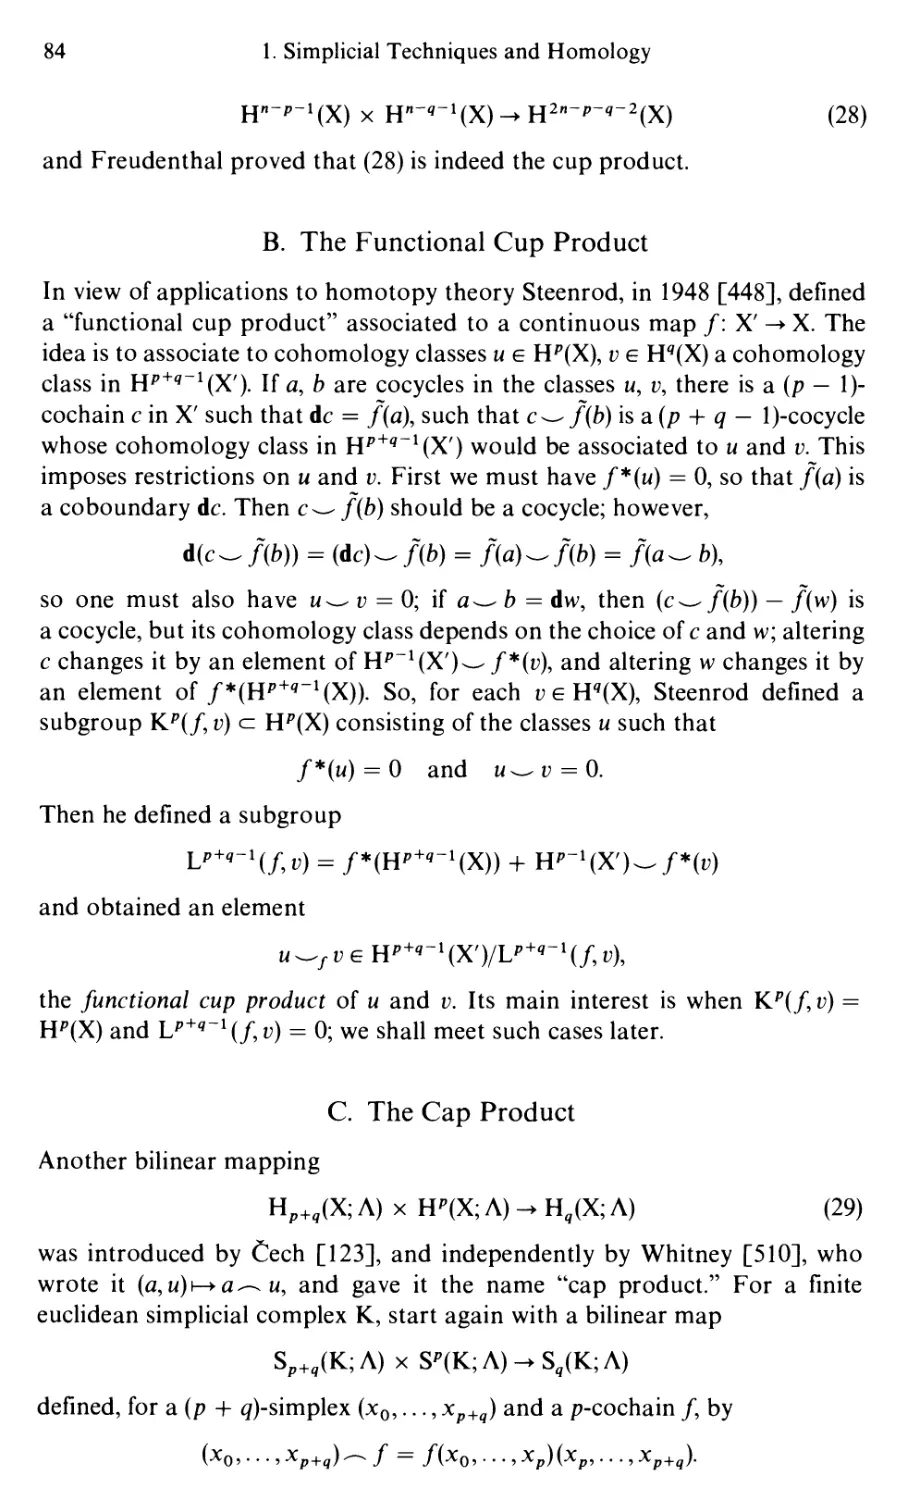 B. The Functional Cup Product
C. The Cap Product